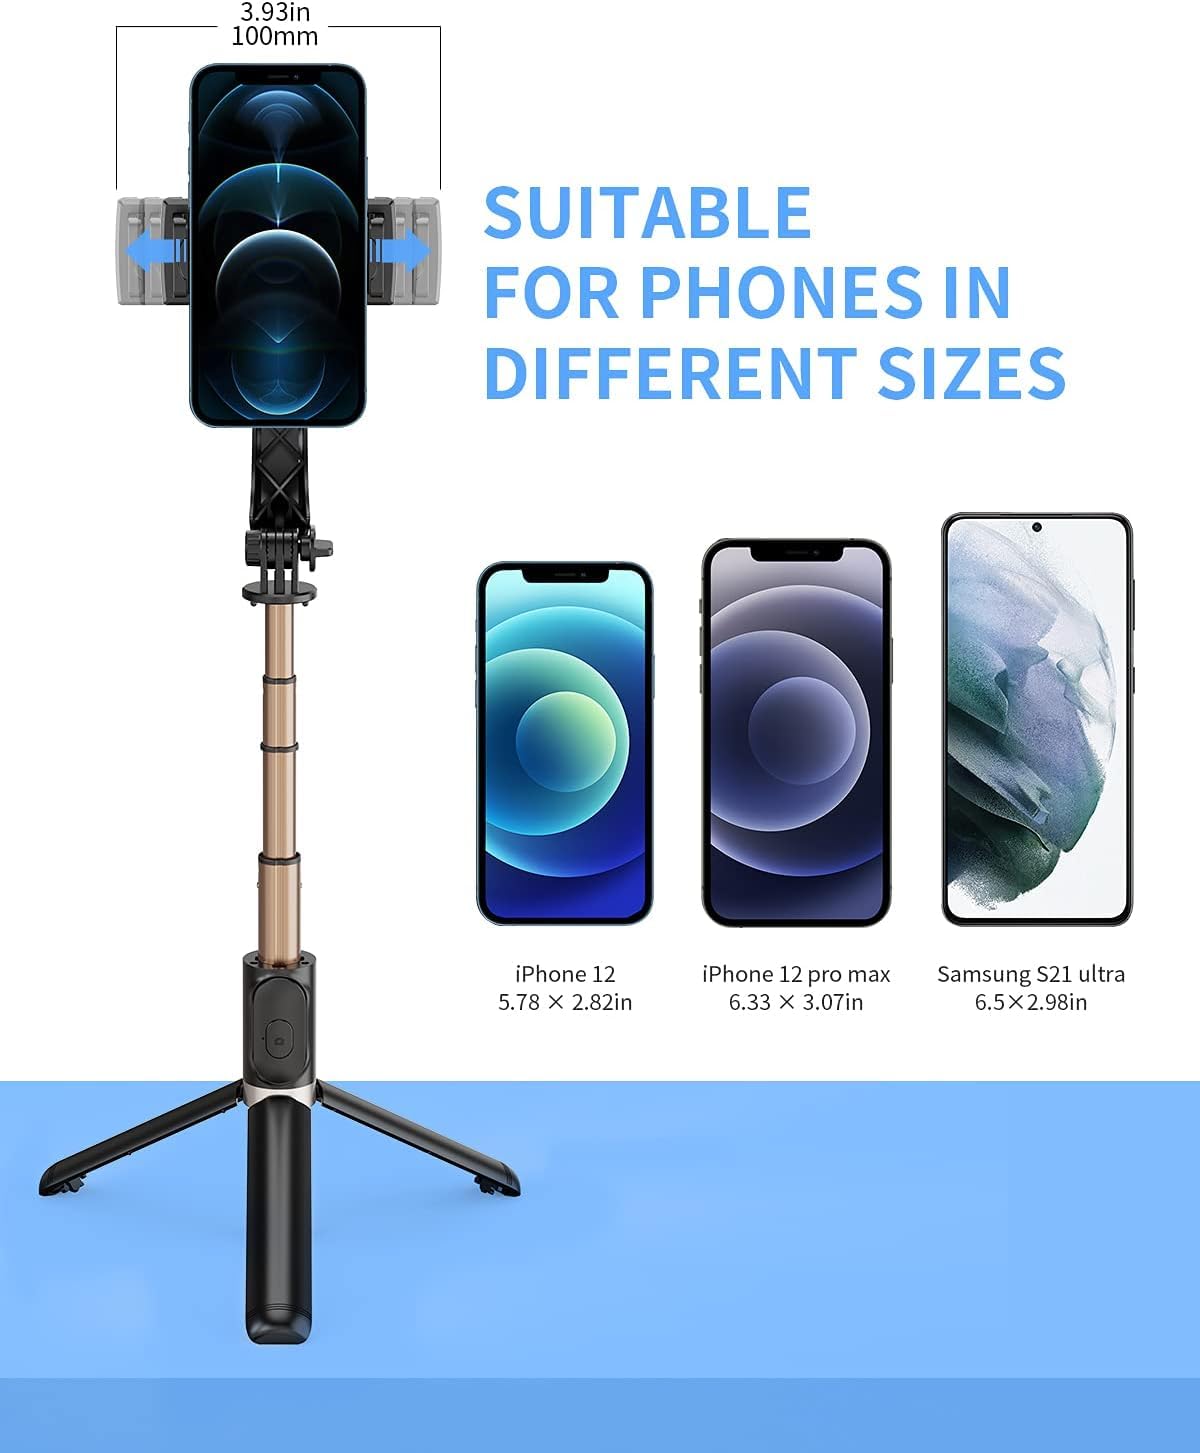 EYUVAA Gimbal Stabilizer with Selfie Stick for All Smartphones | Portable Handheld Gimble with Tripod & Remote for Cell Phone Camera, Smartphone Recording Video & Vlogging